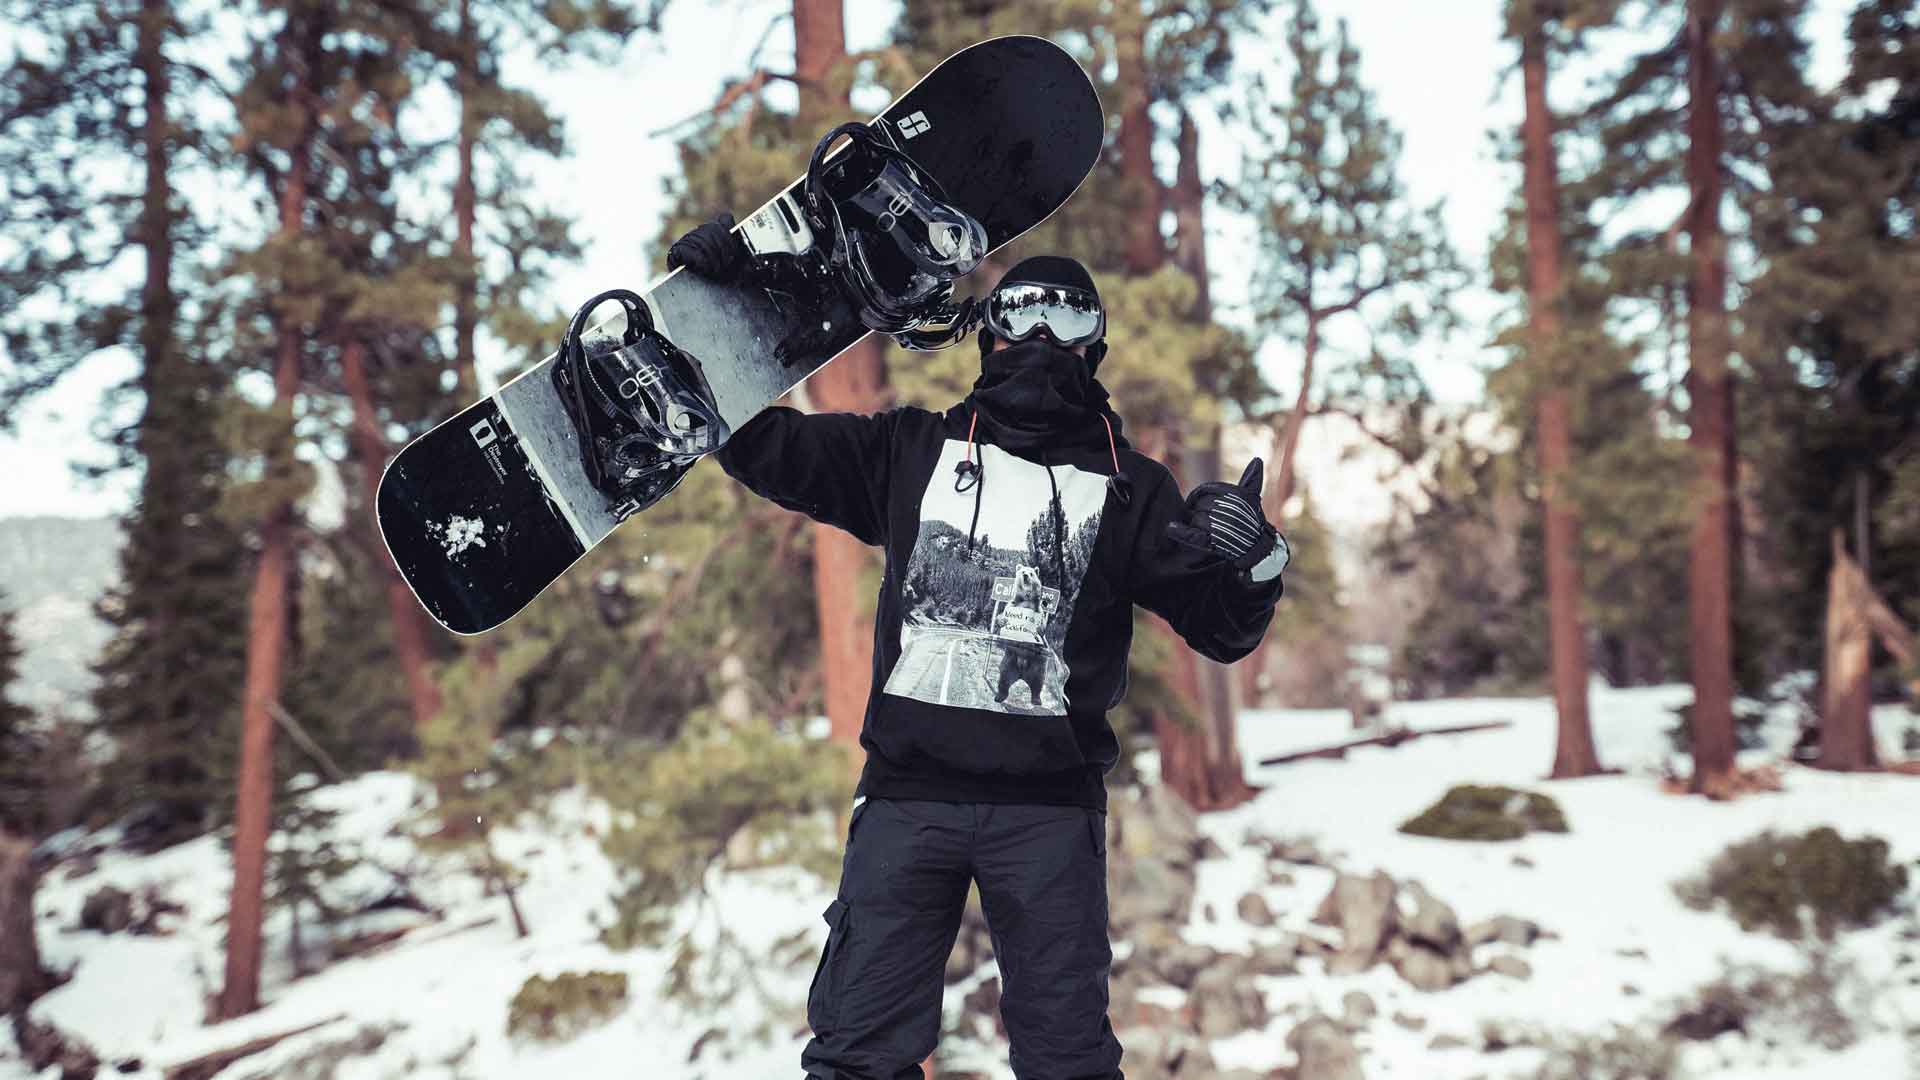 Snowboarding-Gadget-for-You-In-2021-on-LightRoom